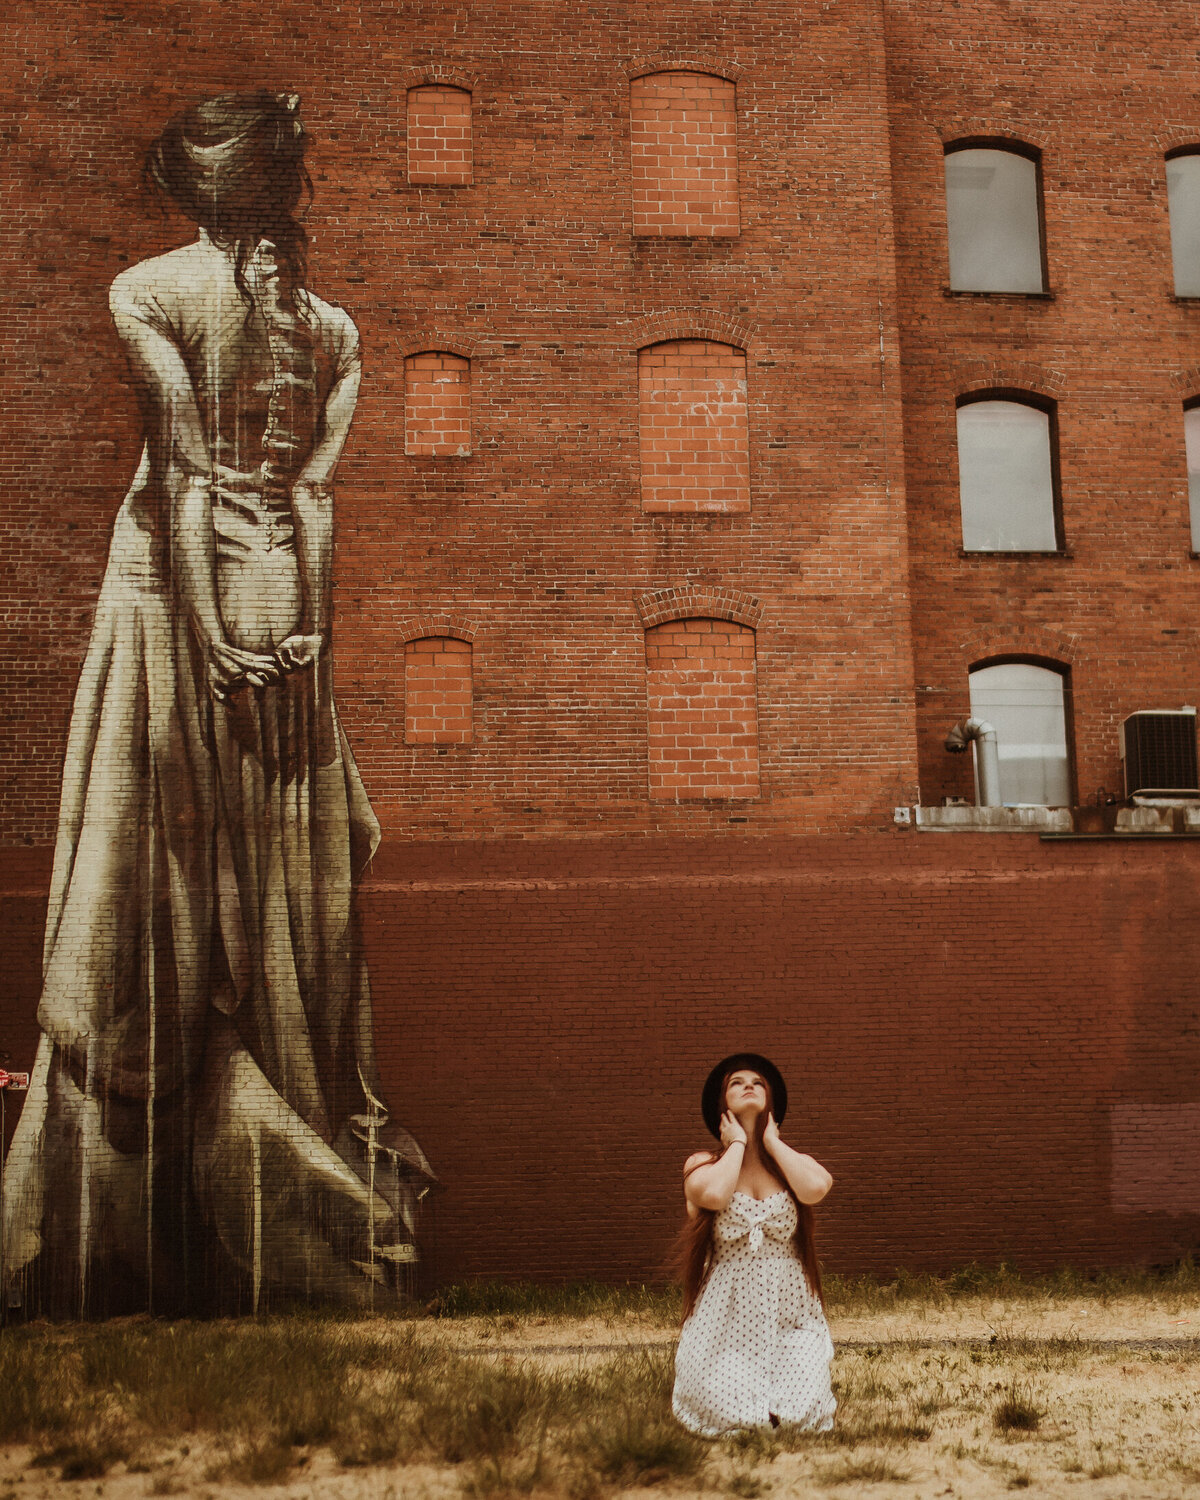 Lifestyle brand creative  headshot of woman kneeling in front of brick building